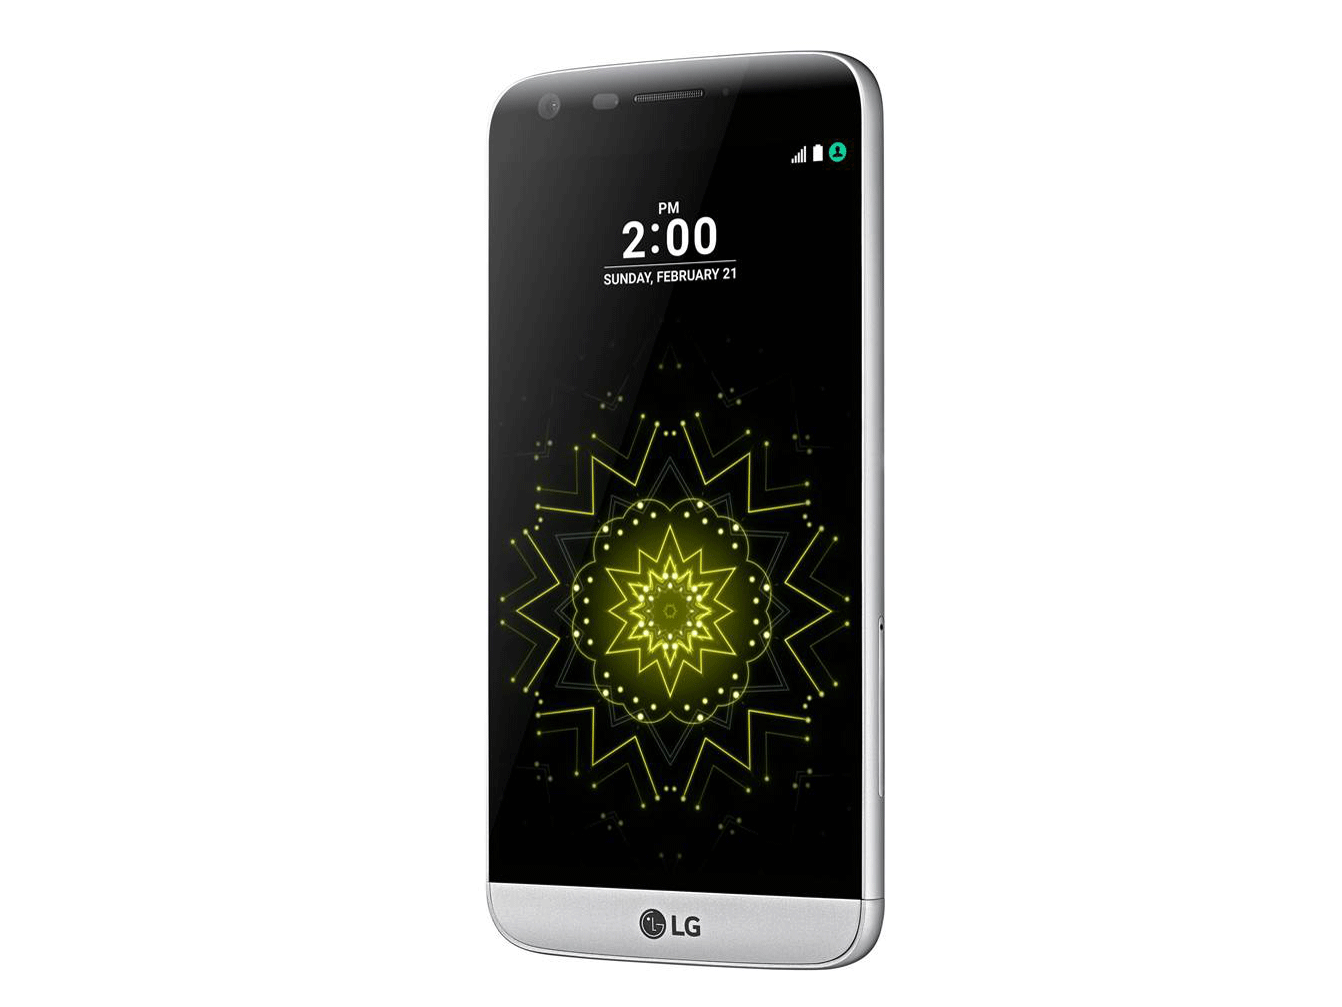 The LG G5 is interesting, but it lets itself down in a few key areas